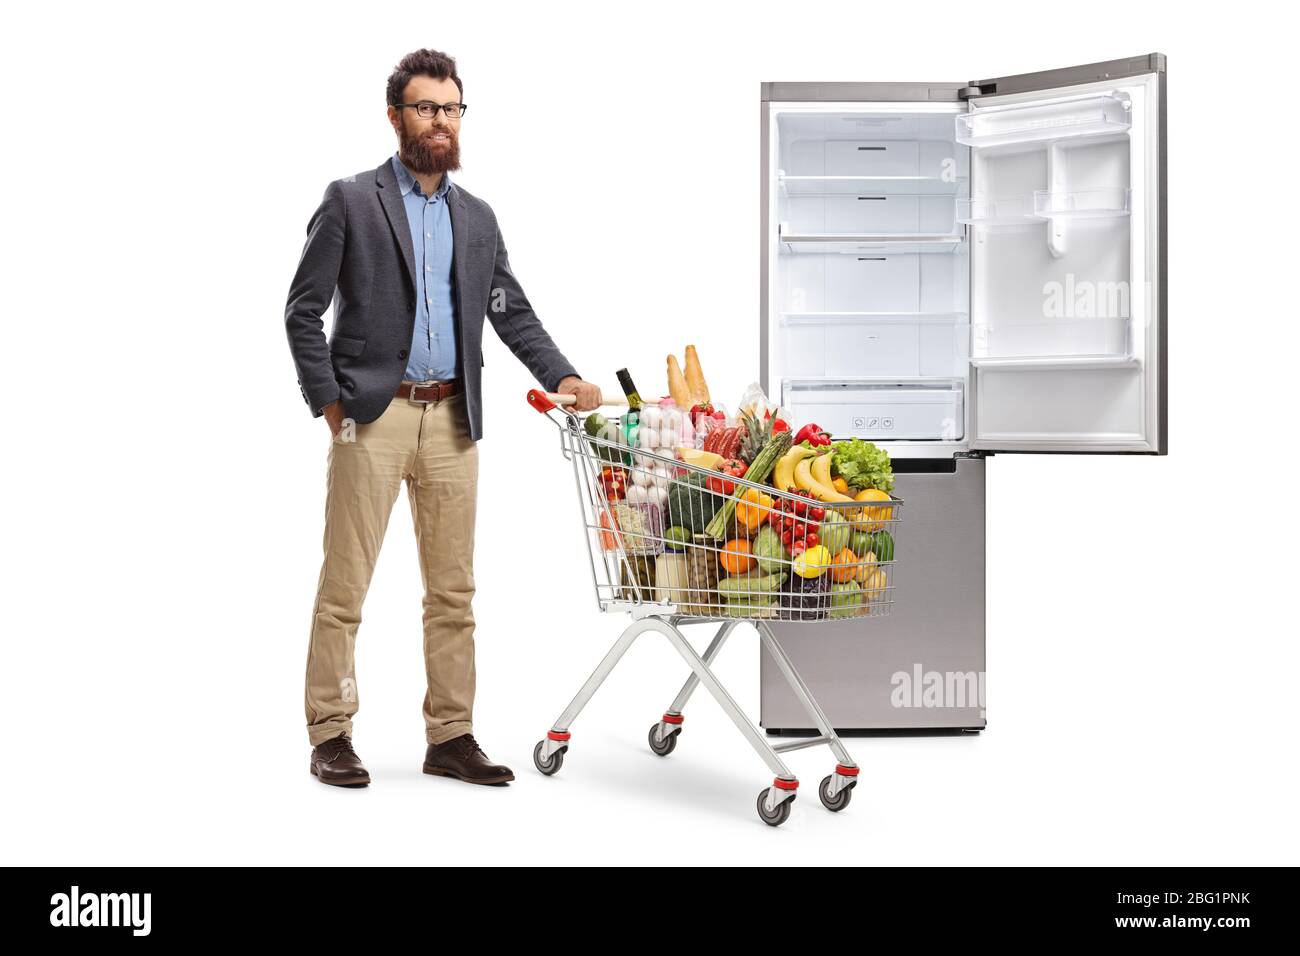 Full length portrait of a bearded man loading a fridge with food supplies isolated on white background Stock Photo